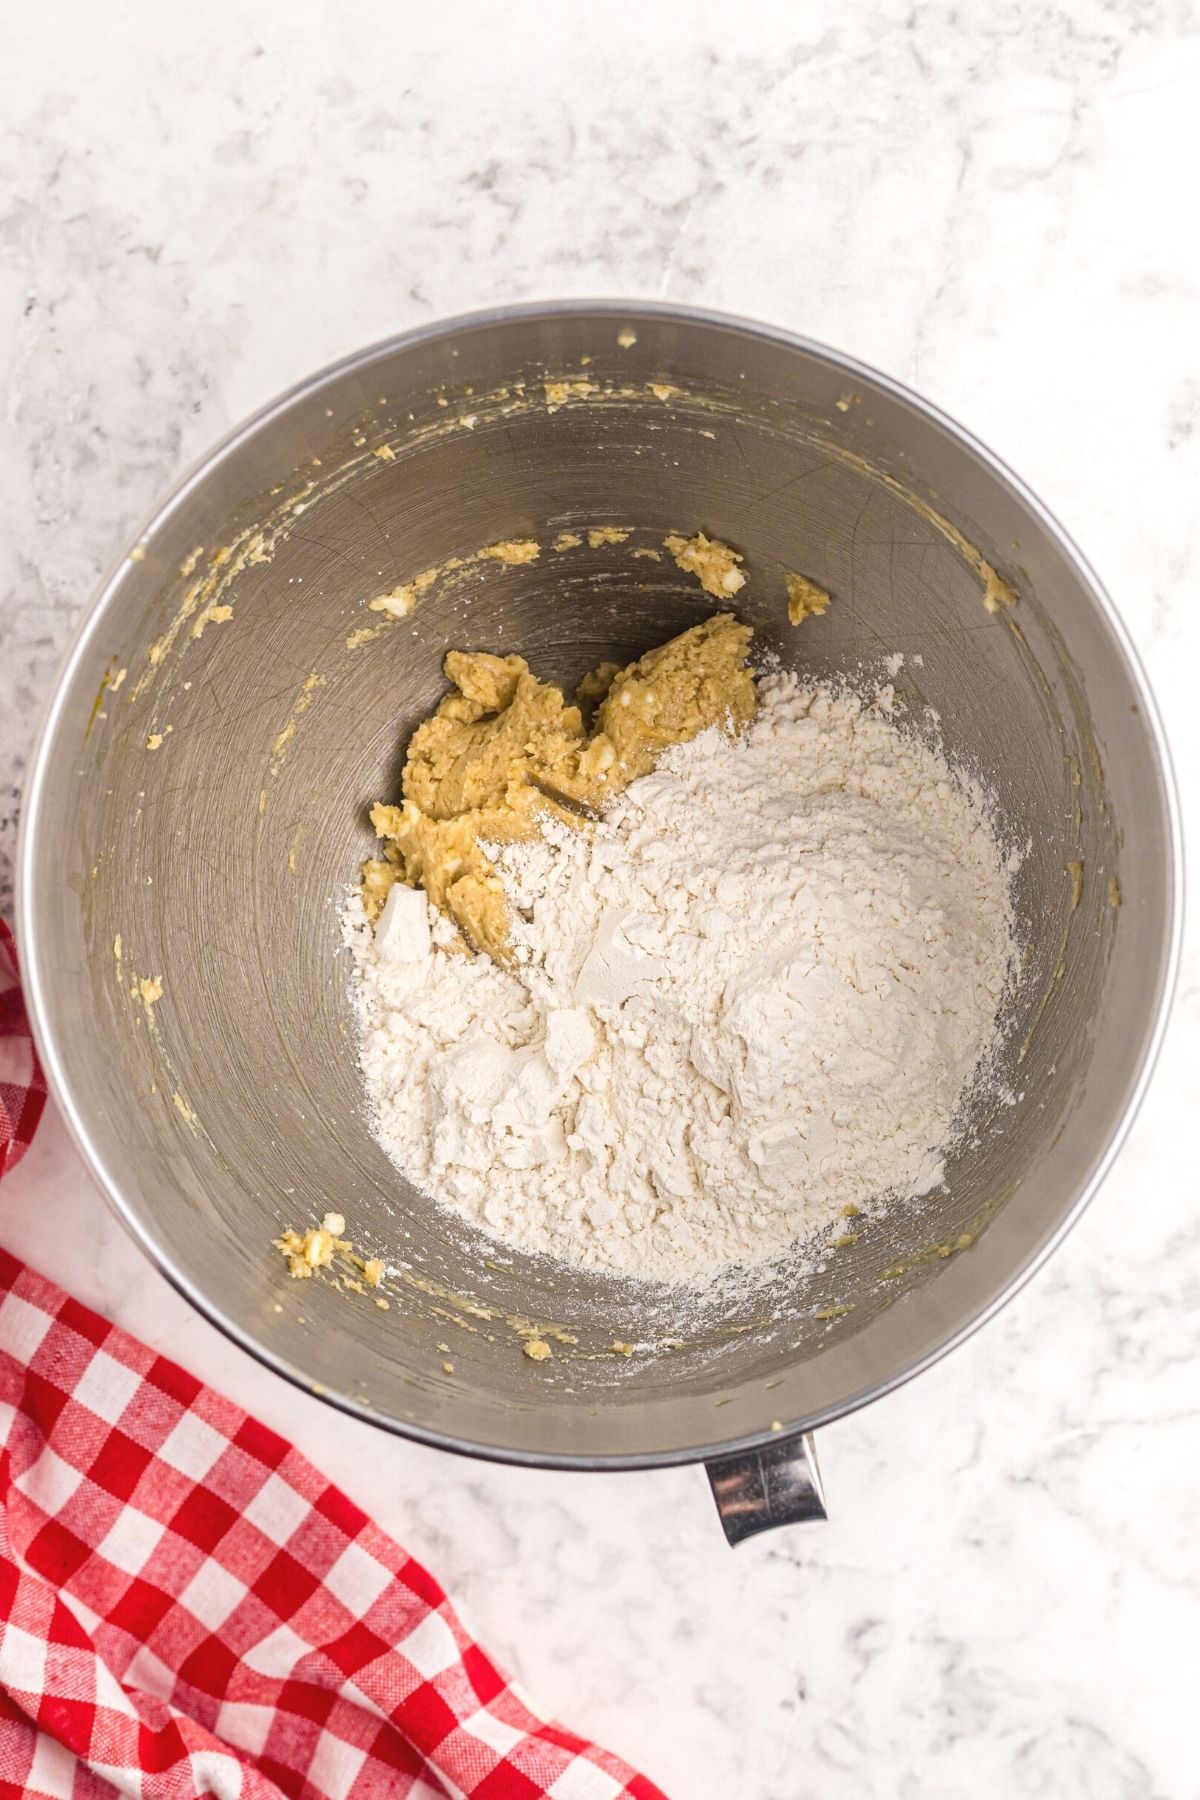 Flour added to dough in mixing bowl